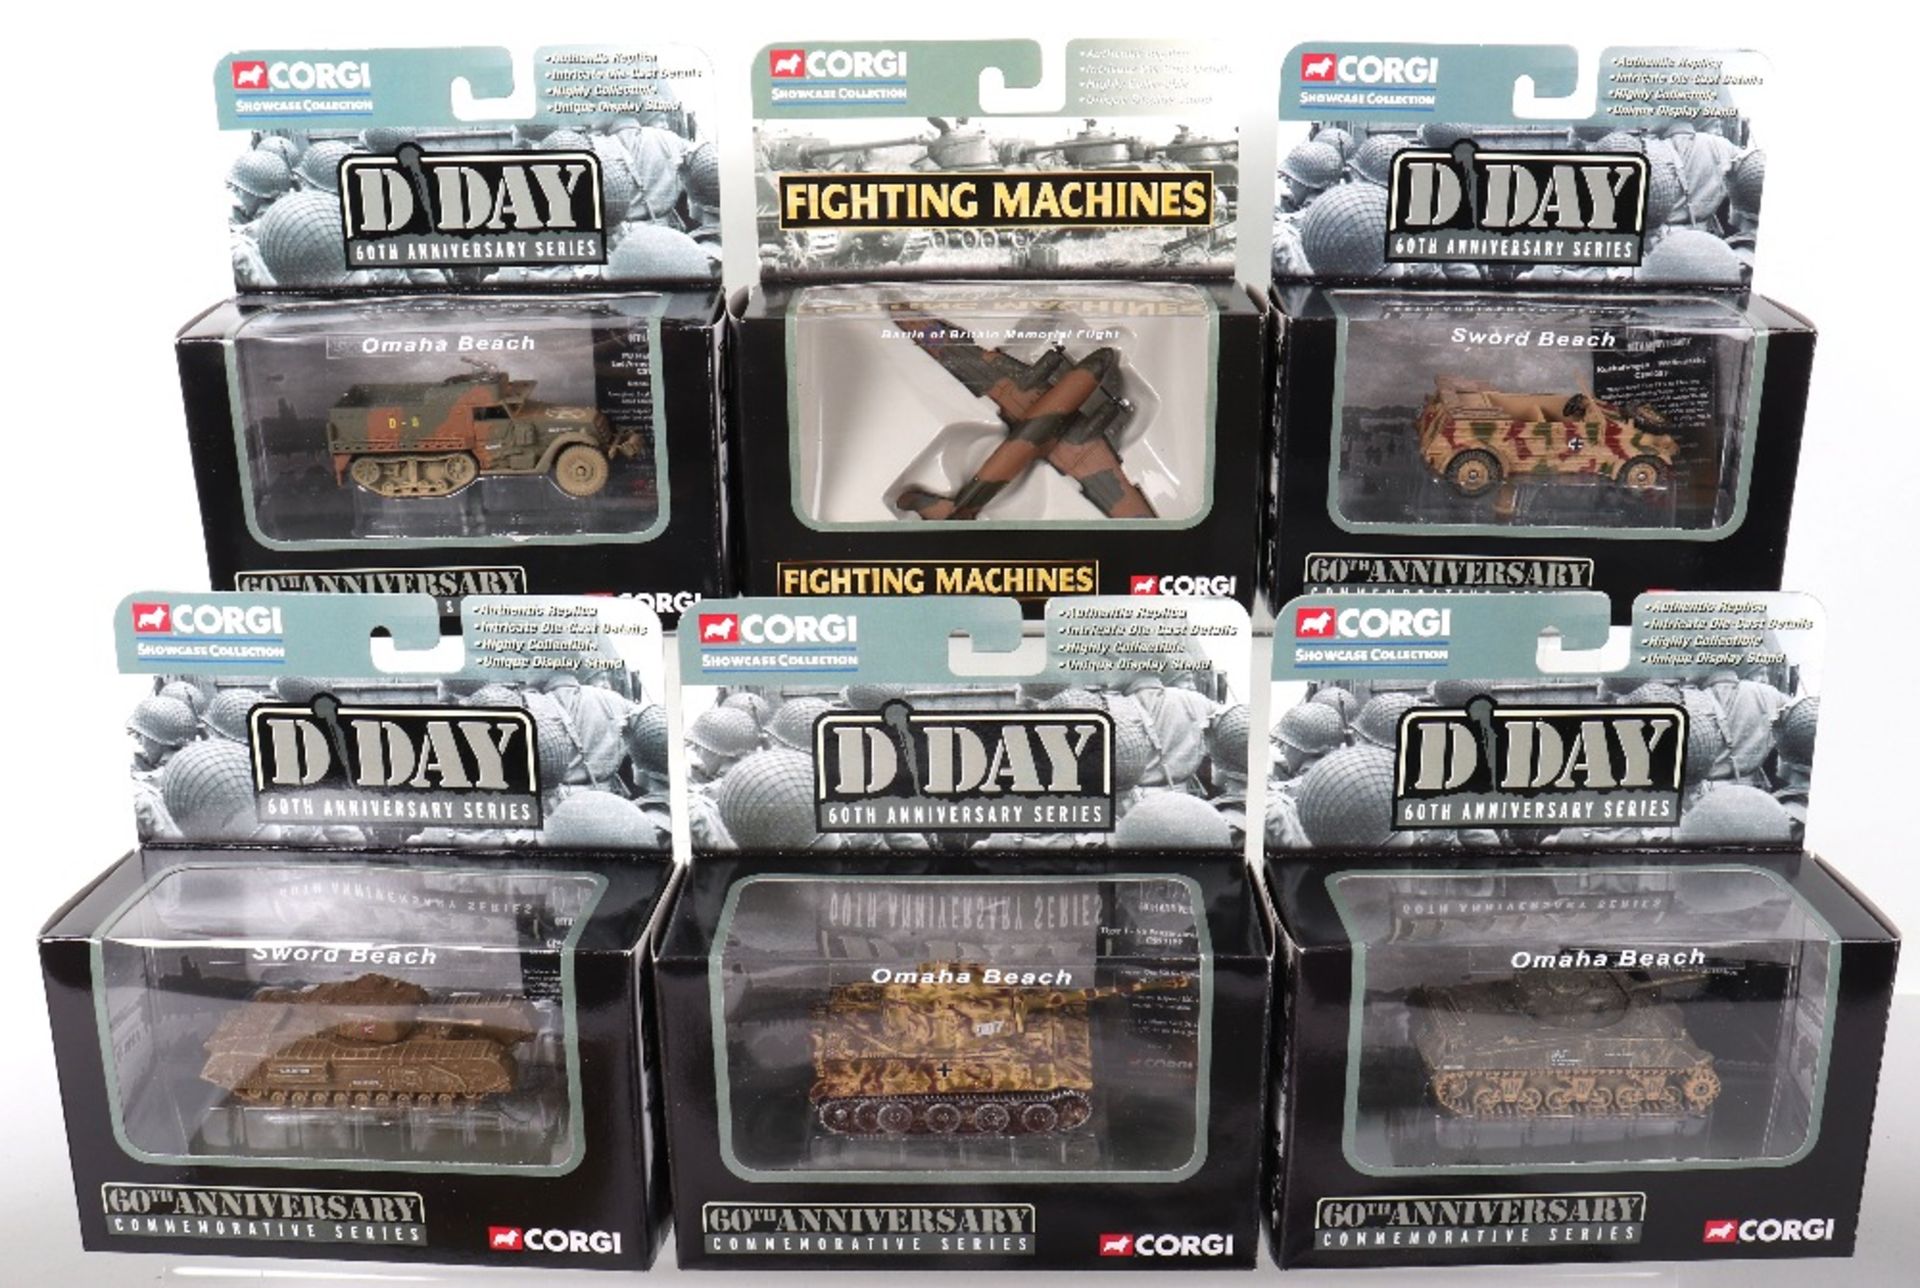 Two Boxed Corgi D-Day 50th Anniversary Models - Image 3 of 5